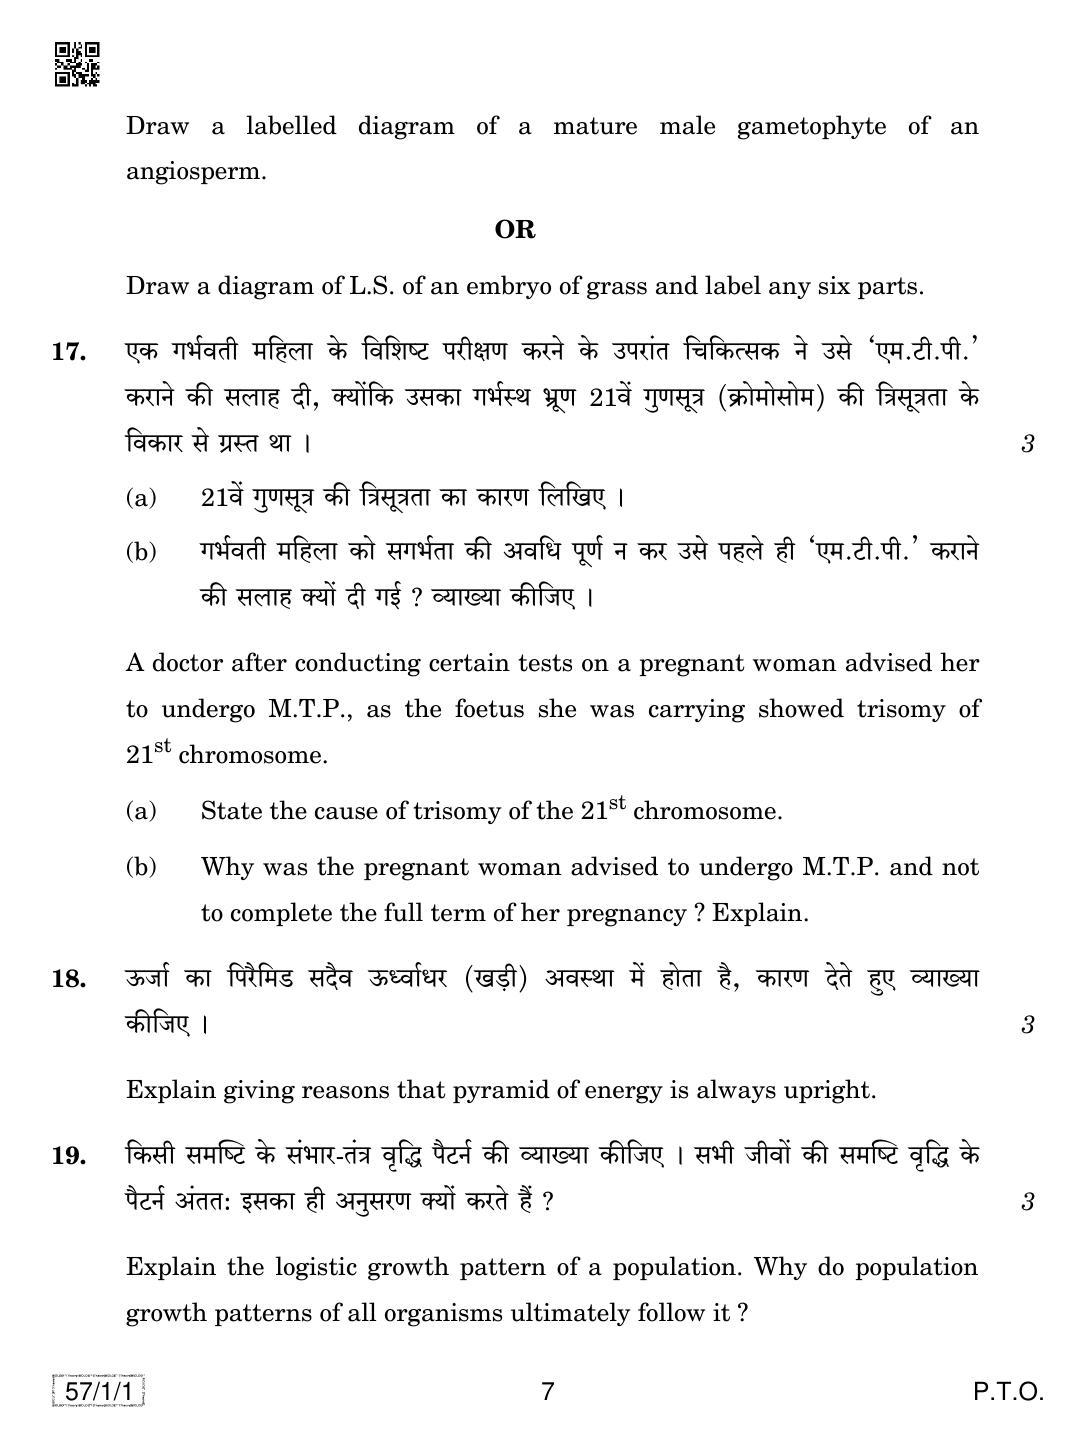 CBSE Class 12 57-1-1 BIOLOGY 2019 Compartment Question Paper - Page 7